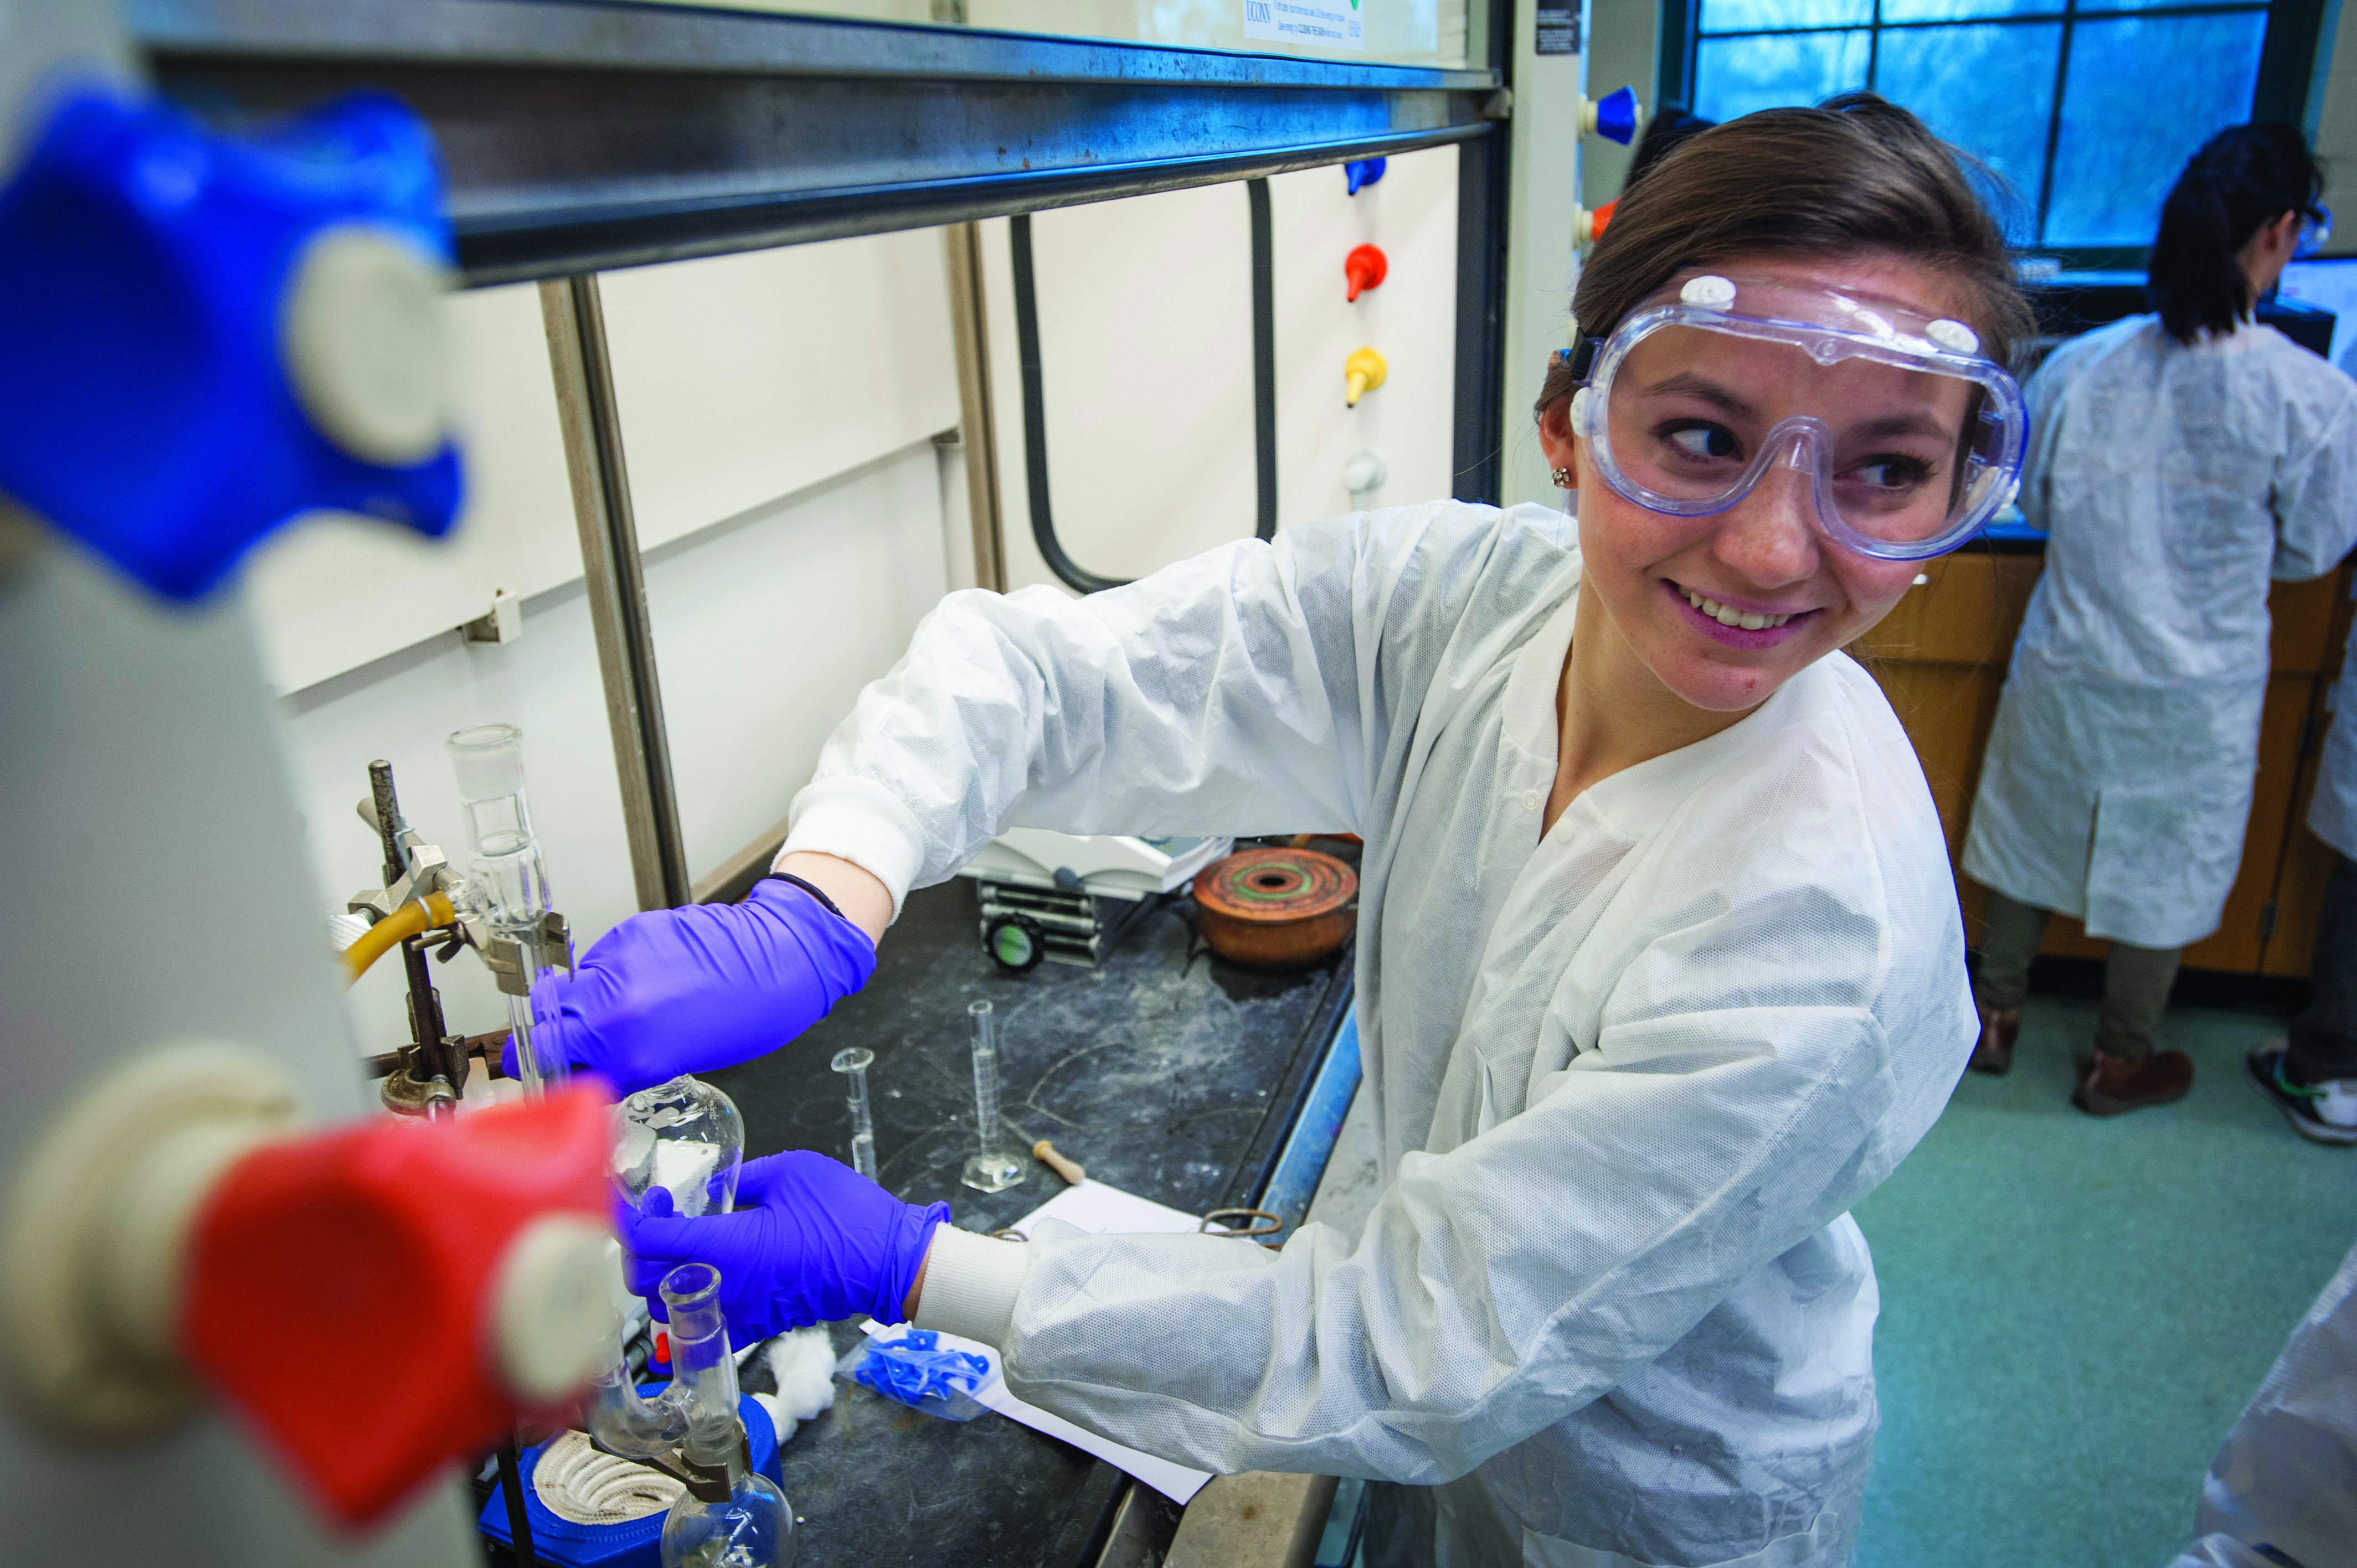 Bridget Oei performs an experiment with classmates in a chemistry lab. (Sean Flynn/UConn Photo)